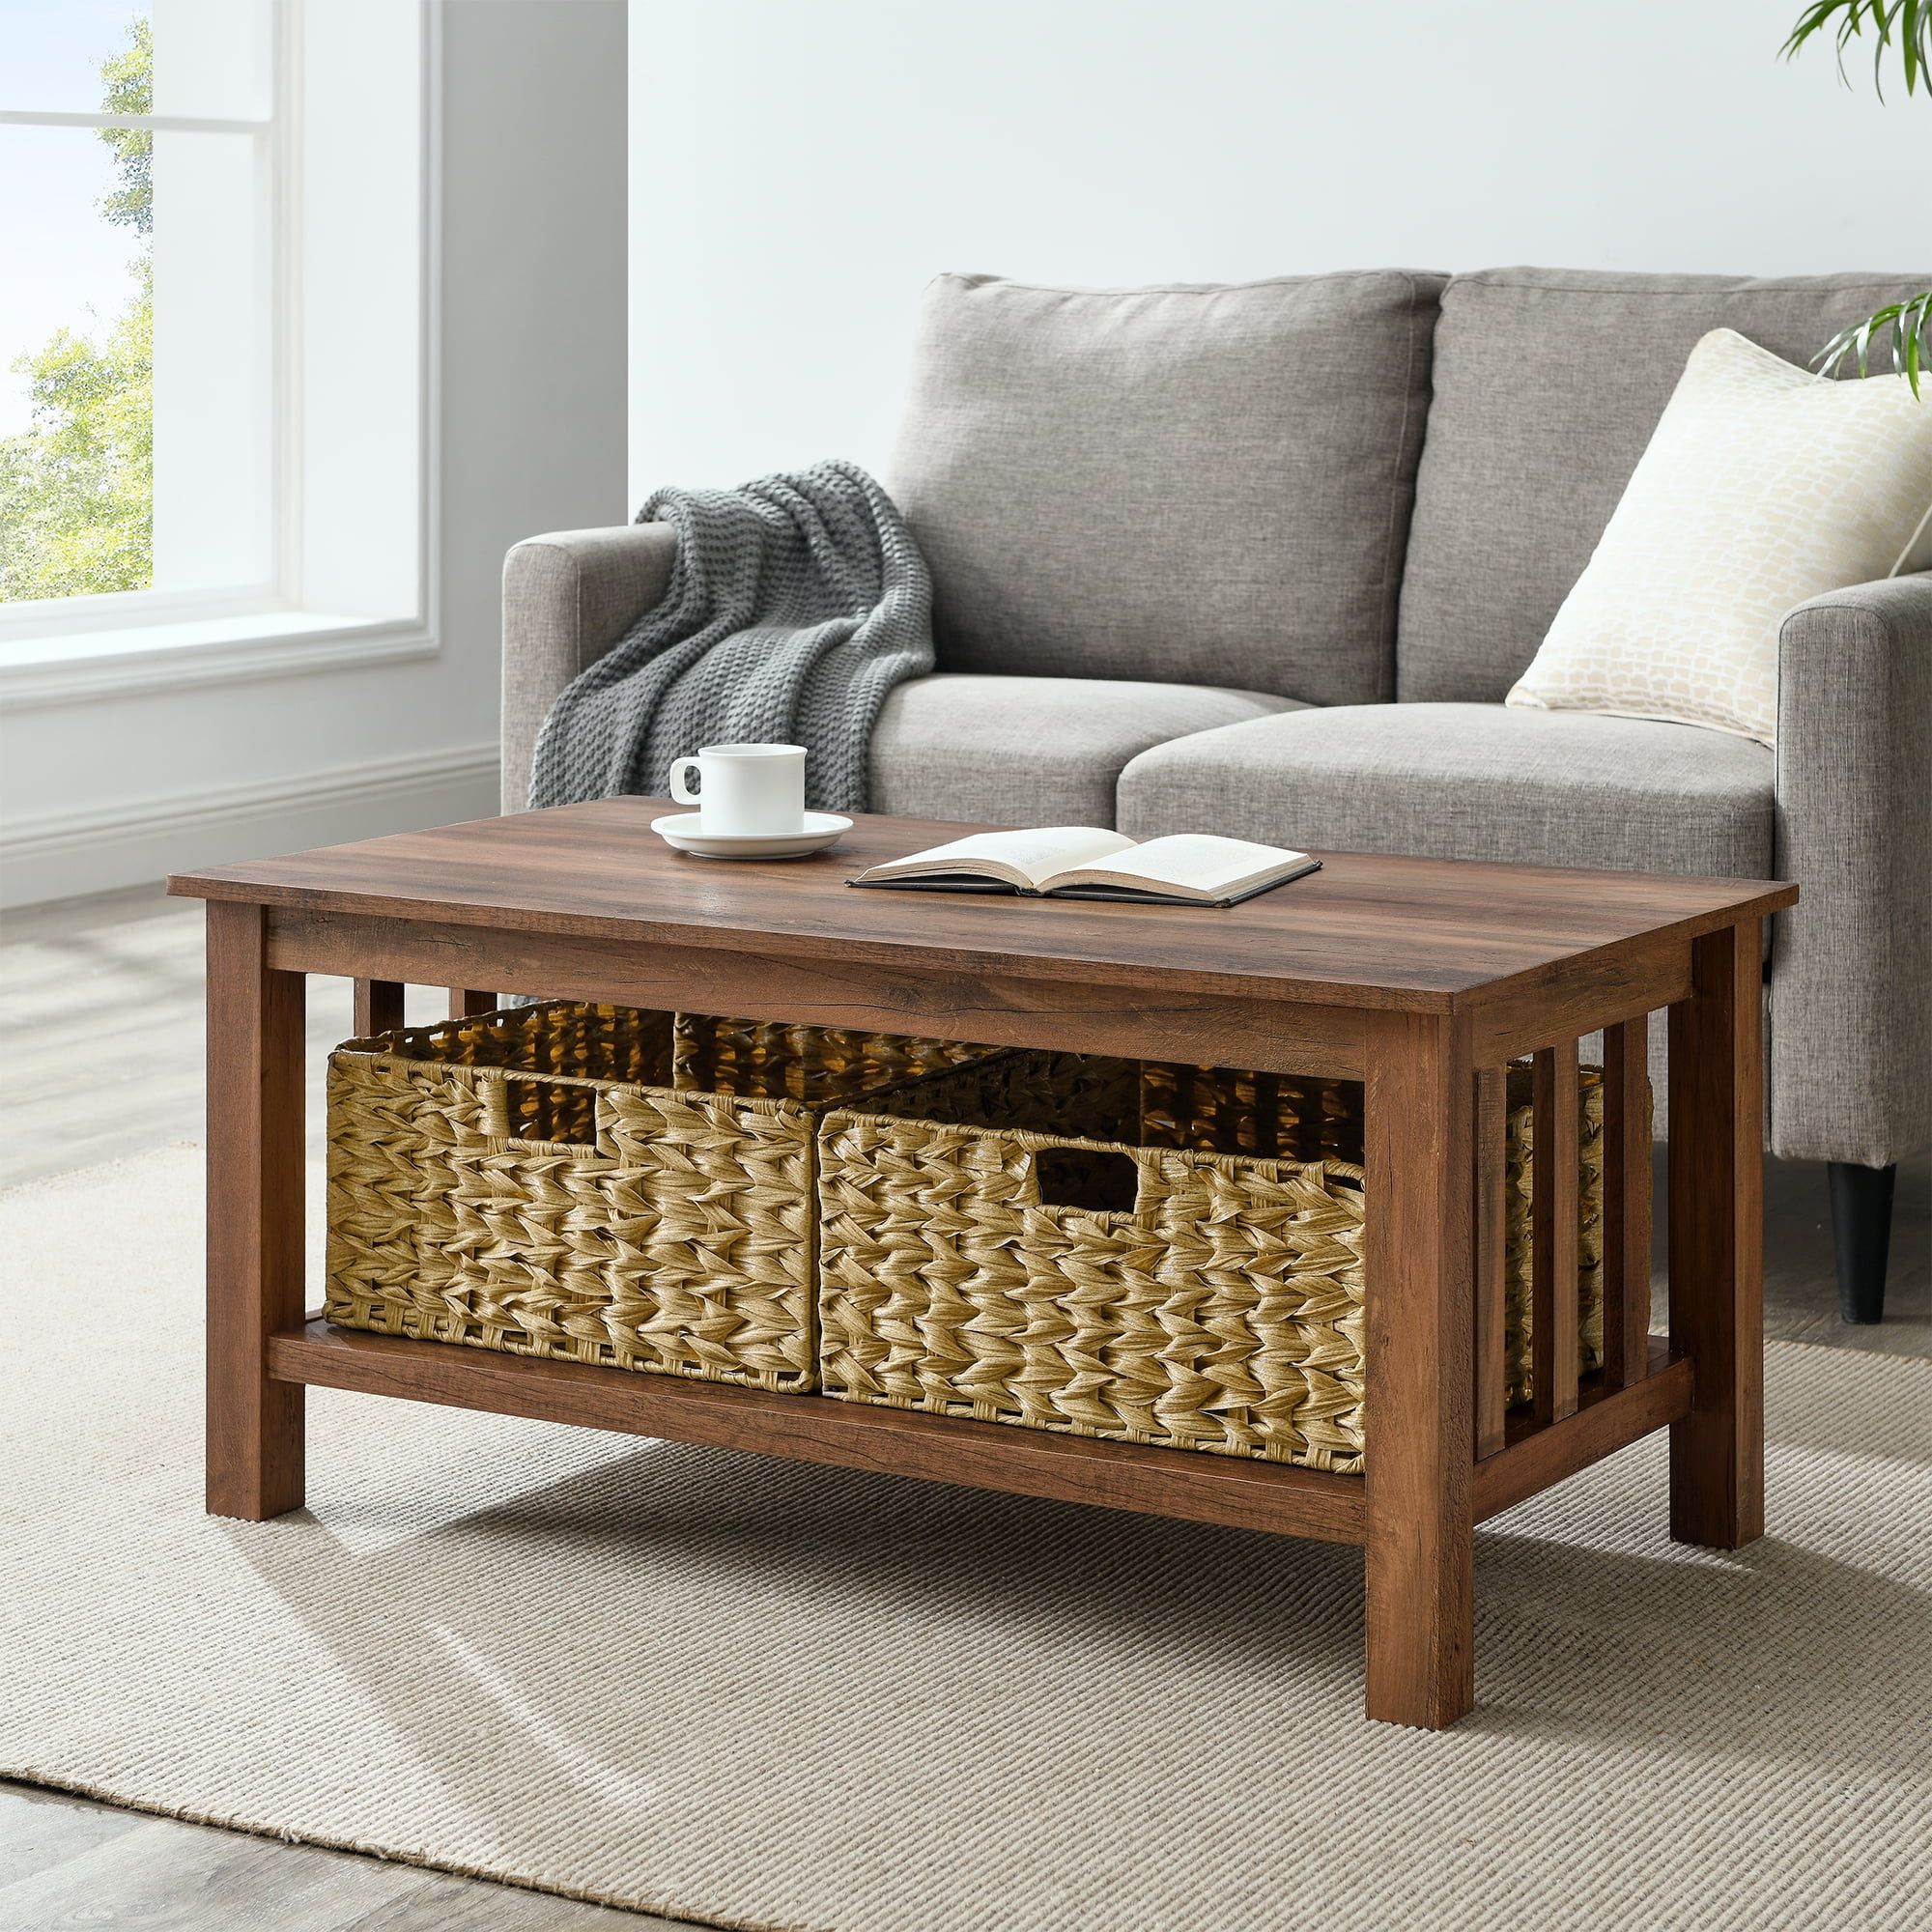 Woven Paths Farmhouse Mission Rectangle Coffee Table With Baskets For Woven Paths Coffee Tables (View 4 of 15)